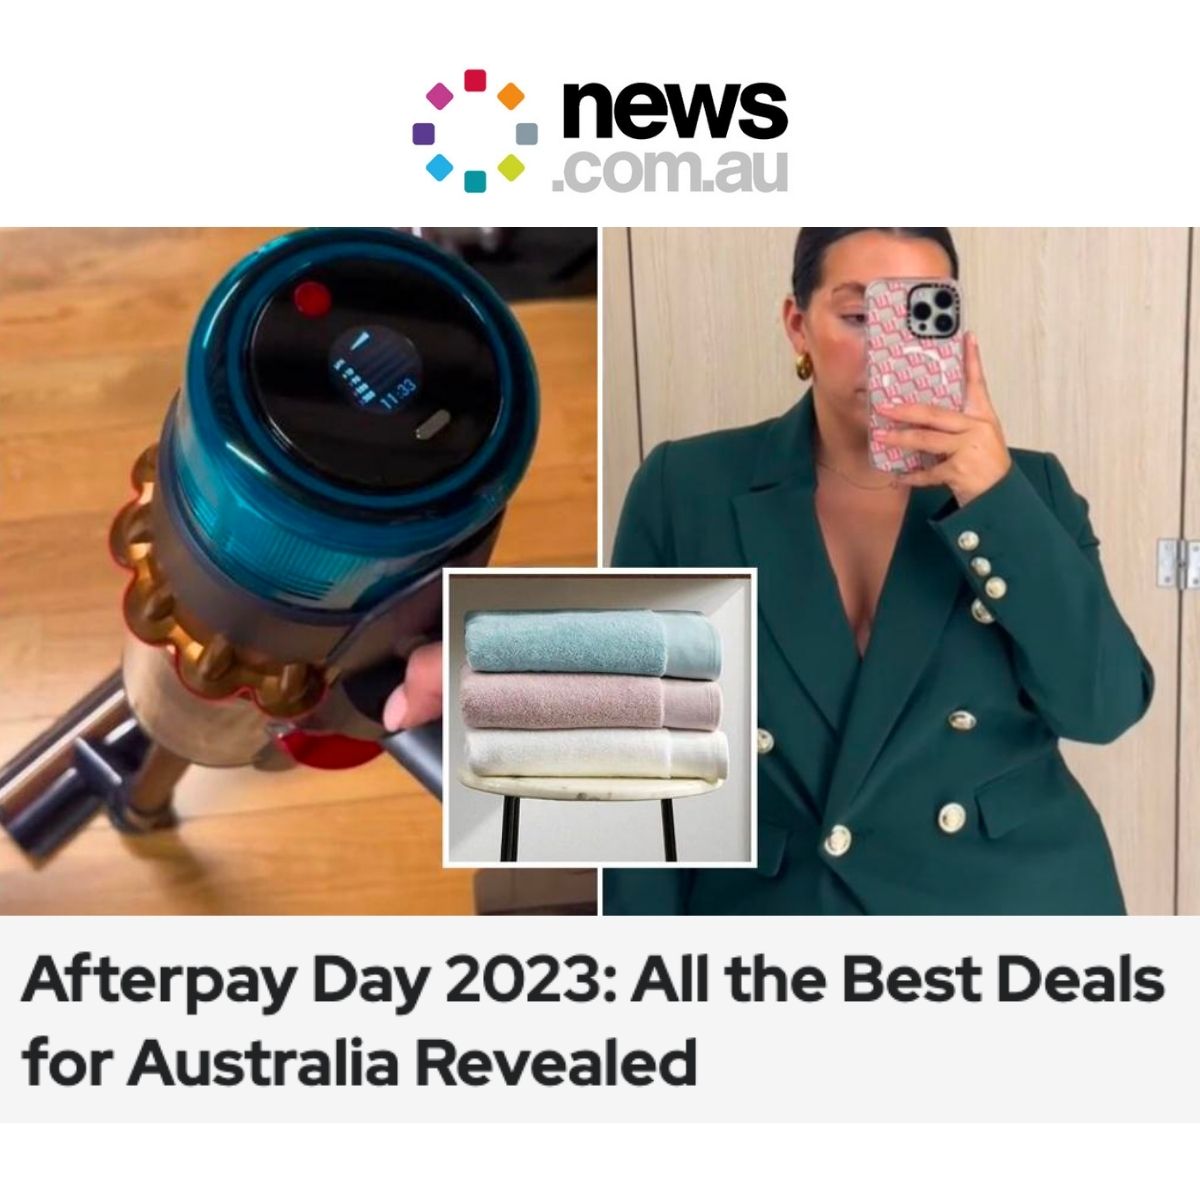 Afterpay Day 2023: All the Best Deals for Australia Revealed